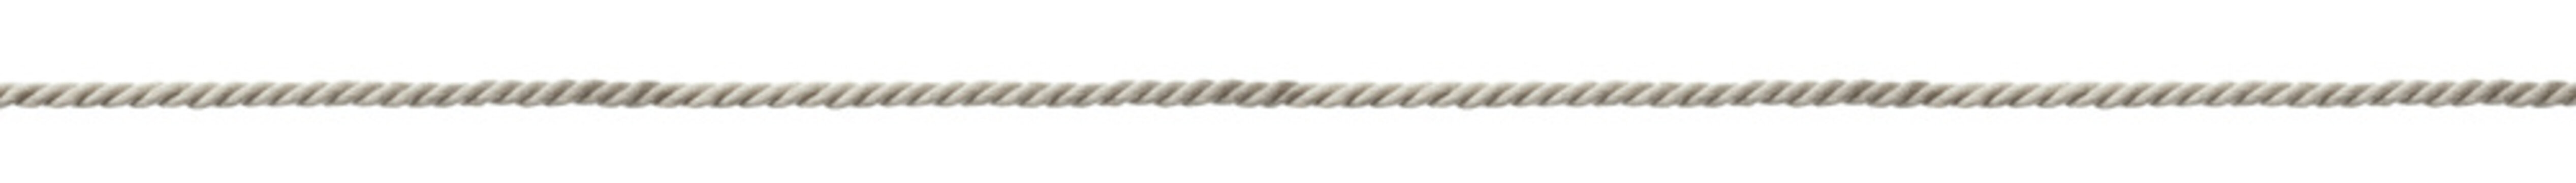 Long durable cotton rope on white background